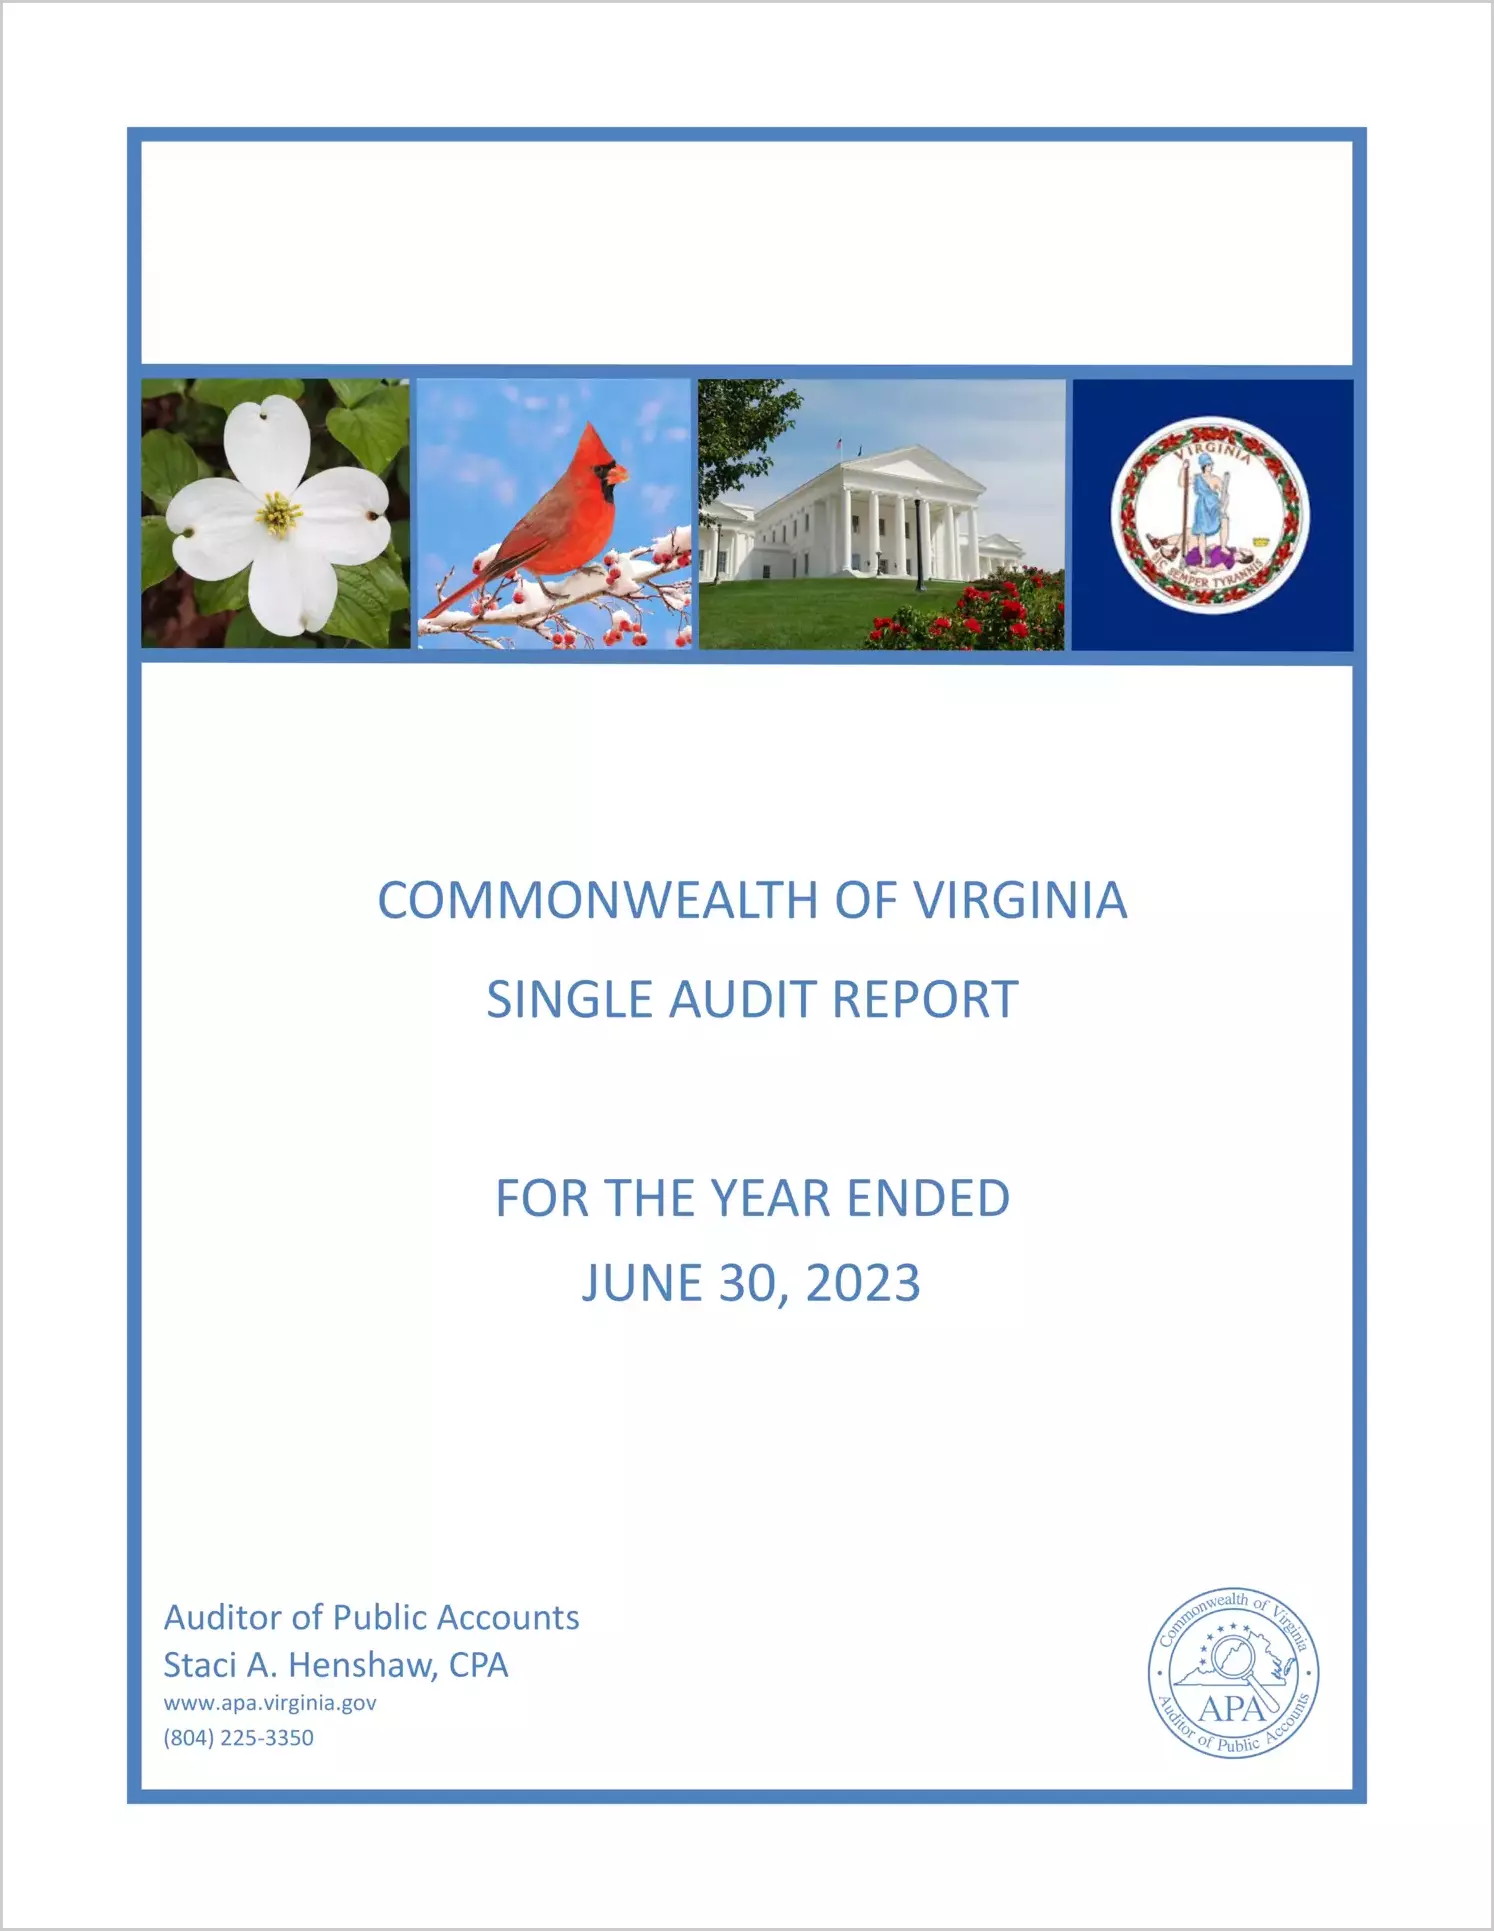 Commonwealth of Virginia Single Audit Report for the Year Ended June 30, 2023